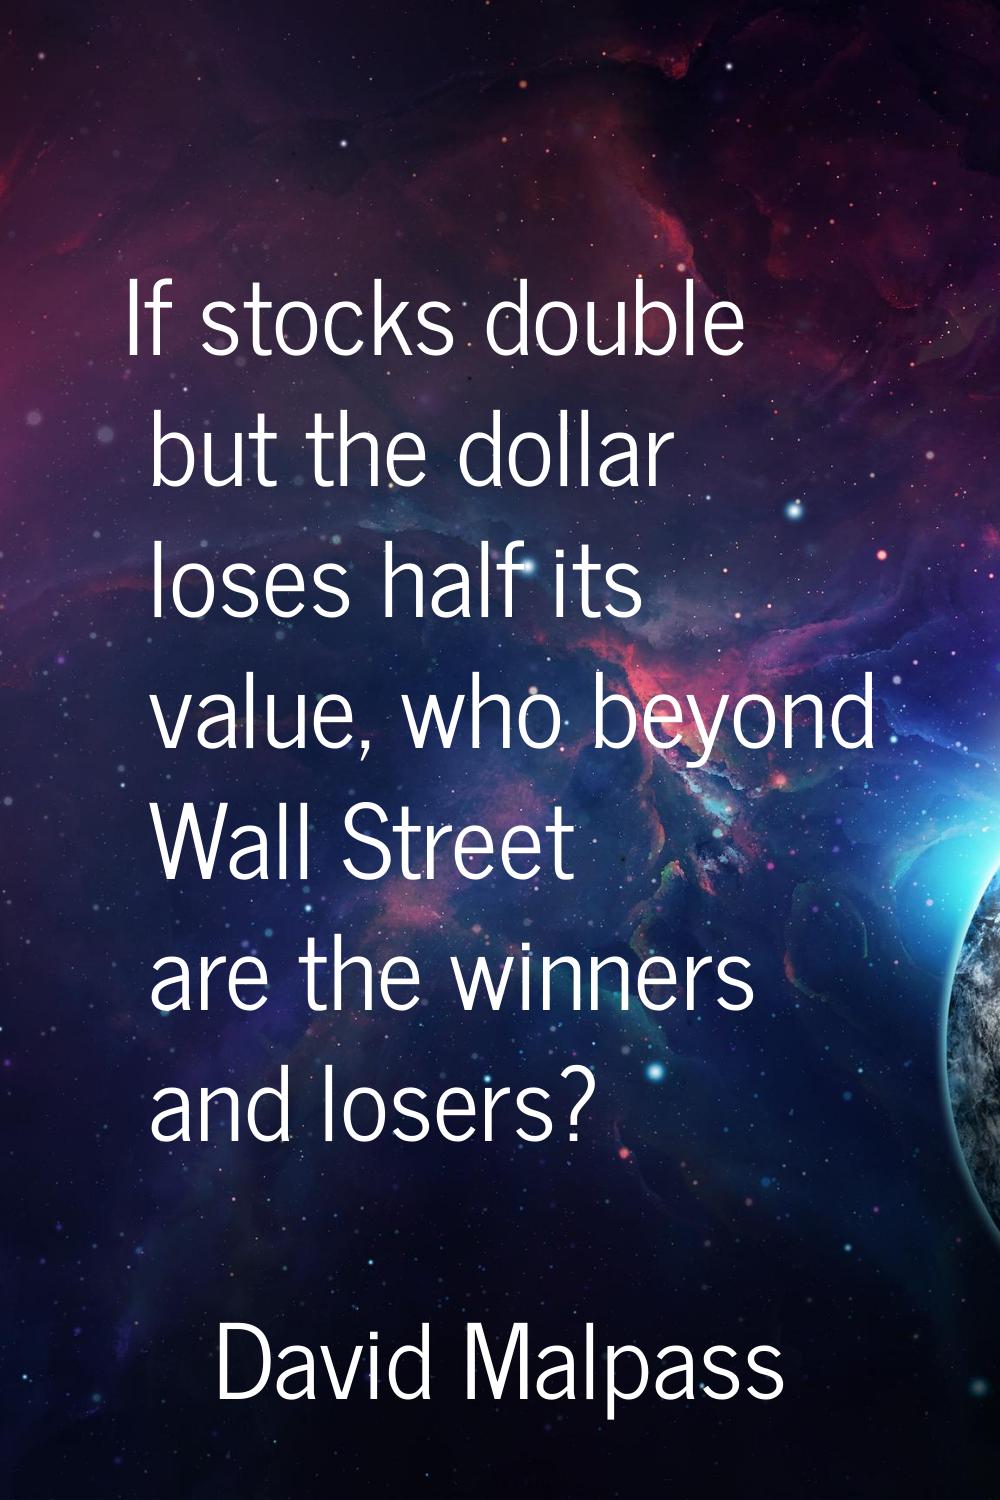 If stocks double but the dollar loses half its value, who beyond Wall Street are the winners and lo